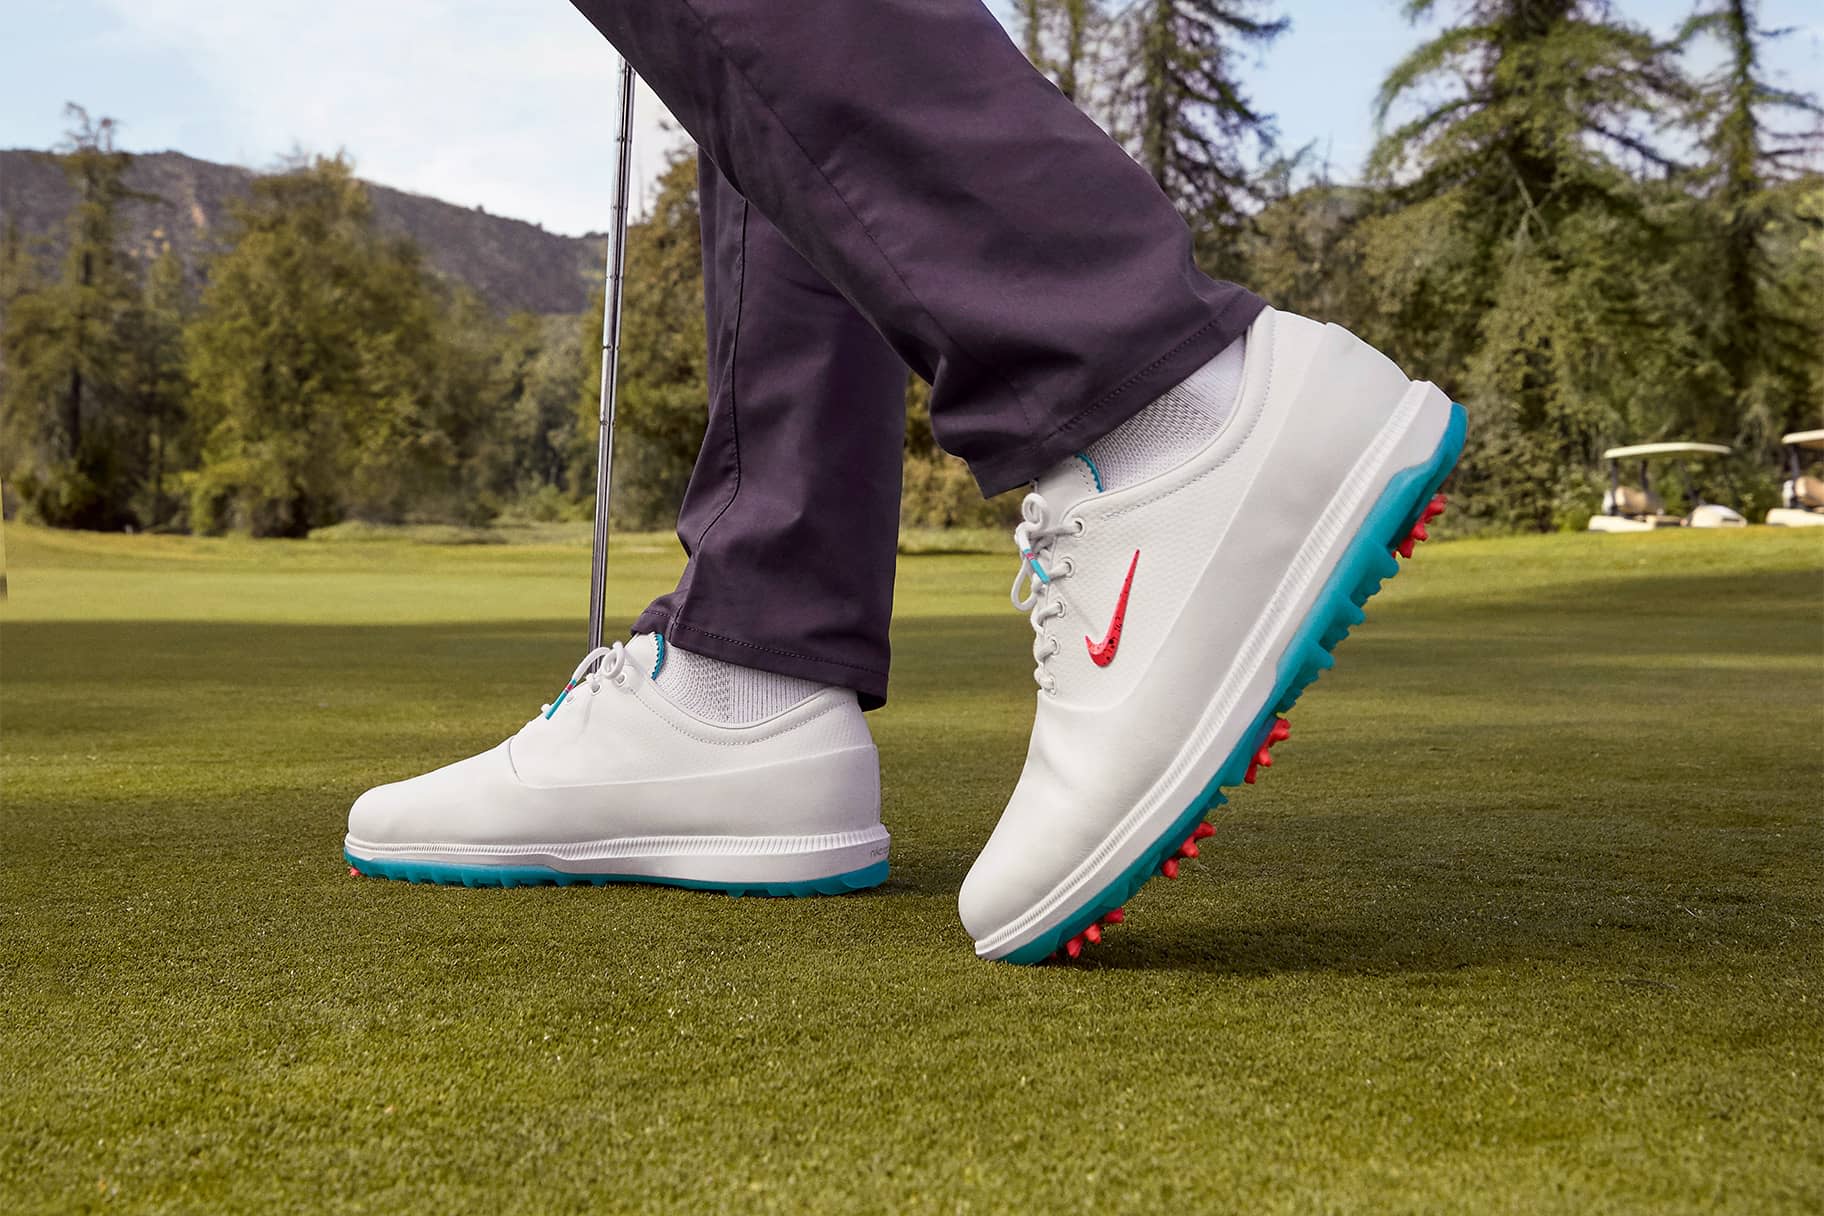 Cruel Ritual Unirse Nike's Best Golf Shoes for Traction, Stability and Comfort. Nike.com